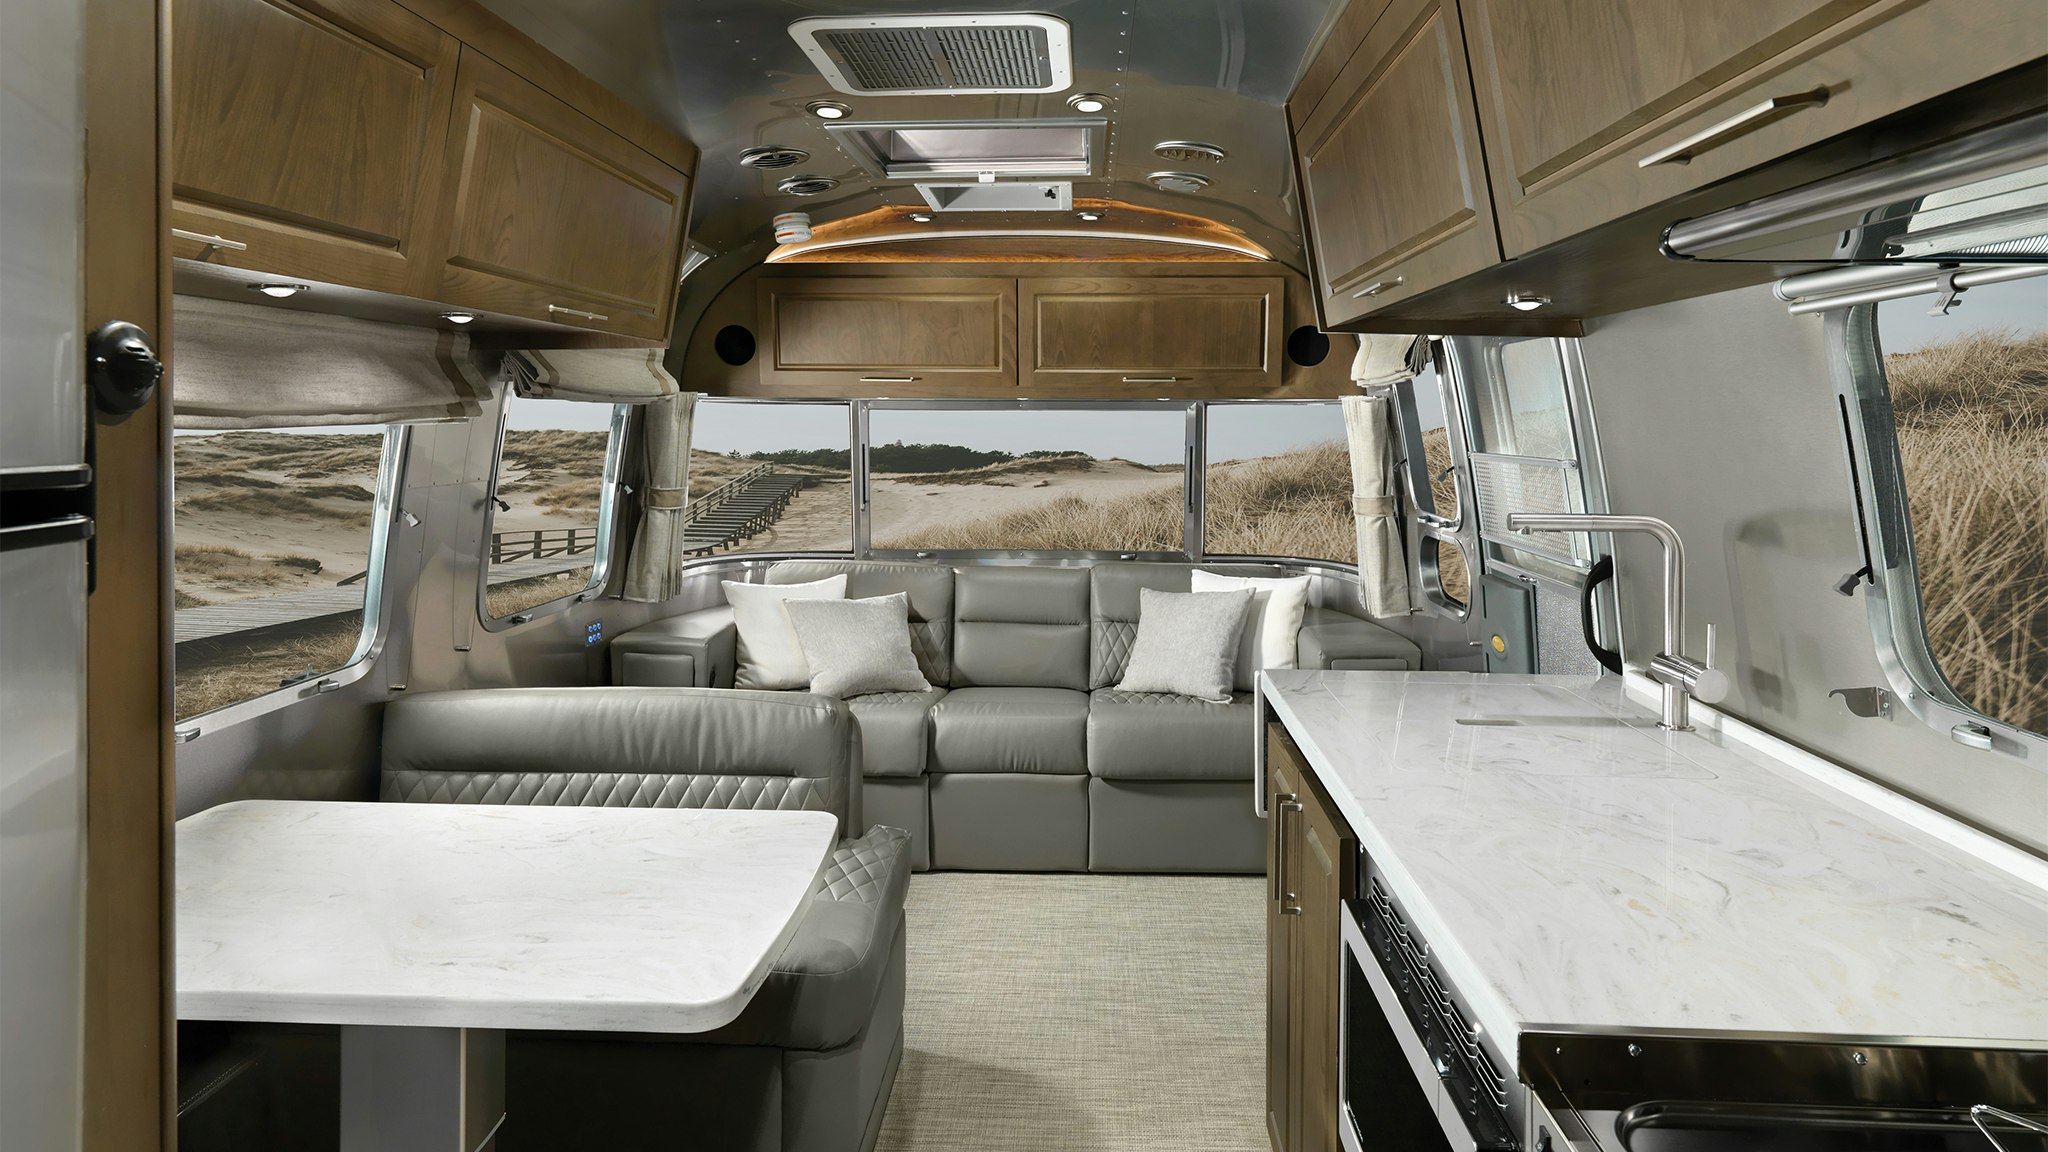 Model Year 2022 Travel Trailer Updates and New Estate Brown Décor for ...